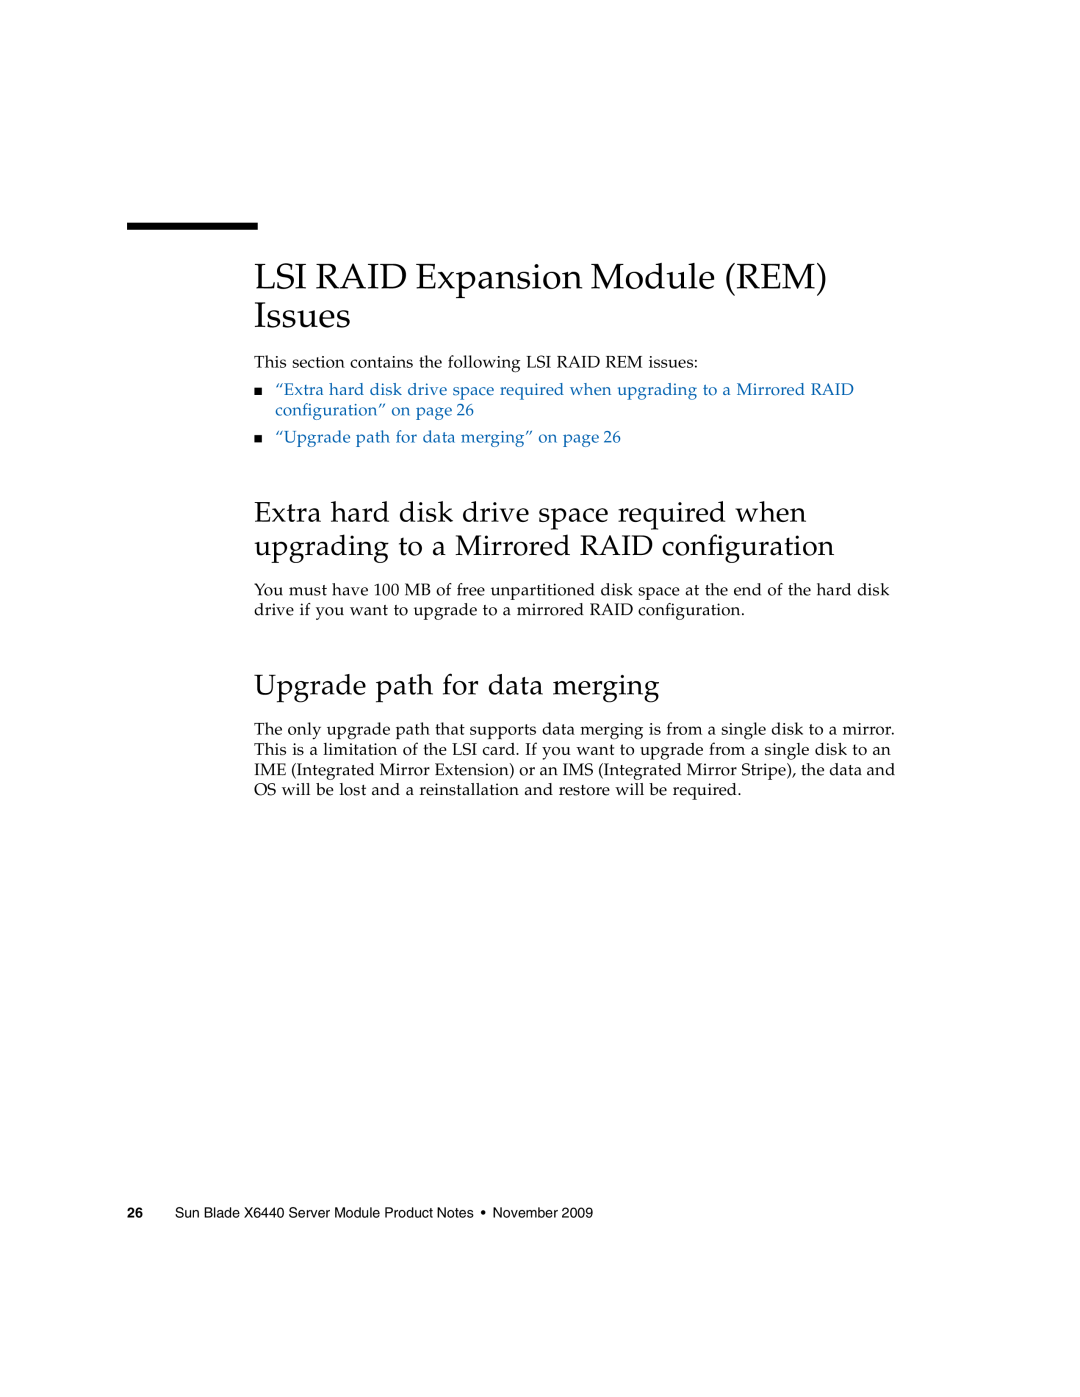 Sun Microsystems X6440 manual LSI RAID Expansion Module REM Issues, Upgrade path for data merging 